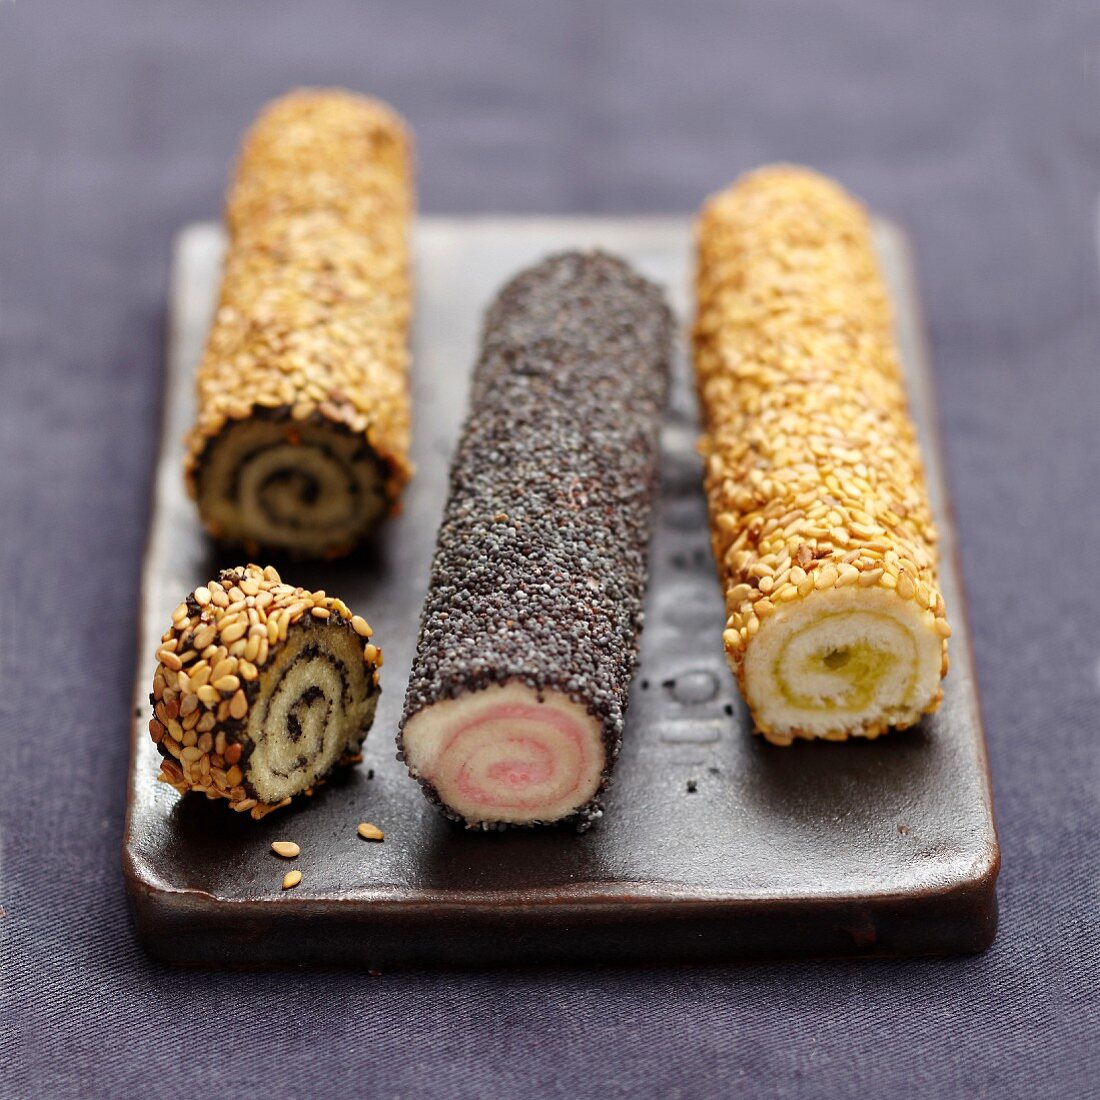 White bread makis coated in sesame and poppy seeds